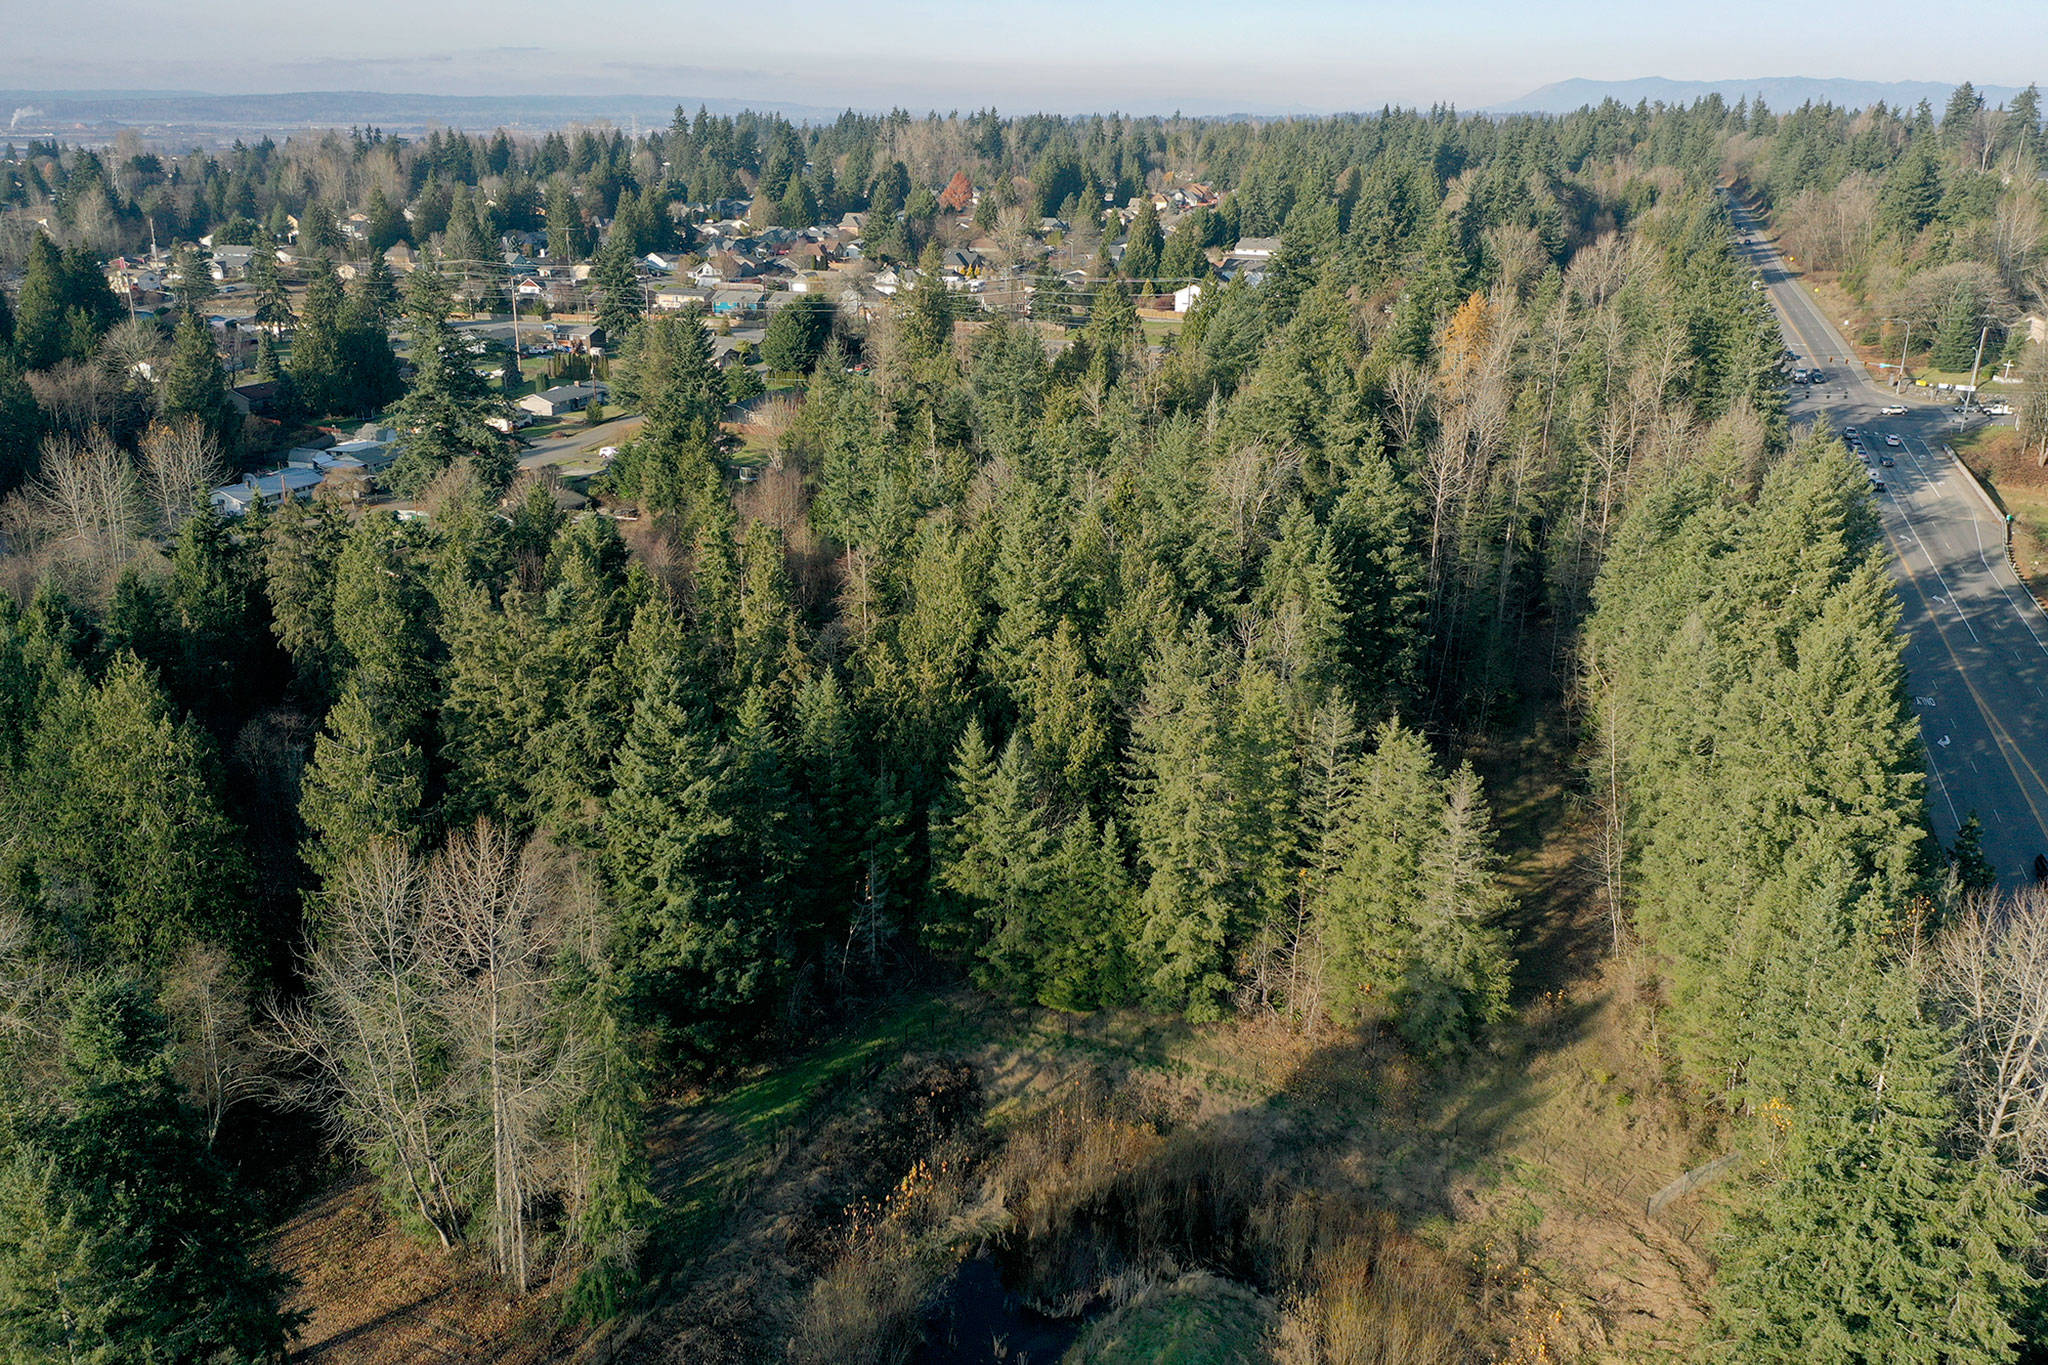 A portion of the site of the proposed Lake Stevens Costco (bottom) at the intersection of Highway 9 (right) and South Lake Stevens Road (below, out of view). (Chuck Taylor / Herald file)